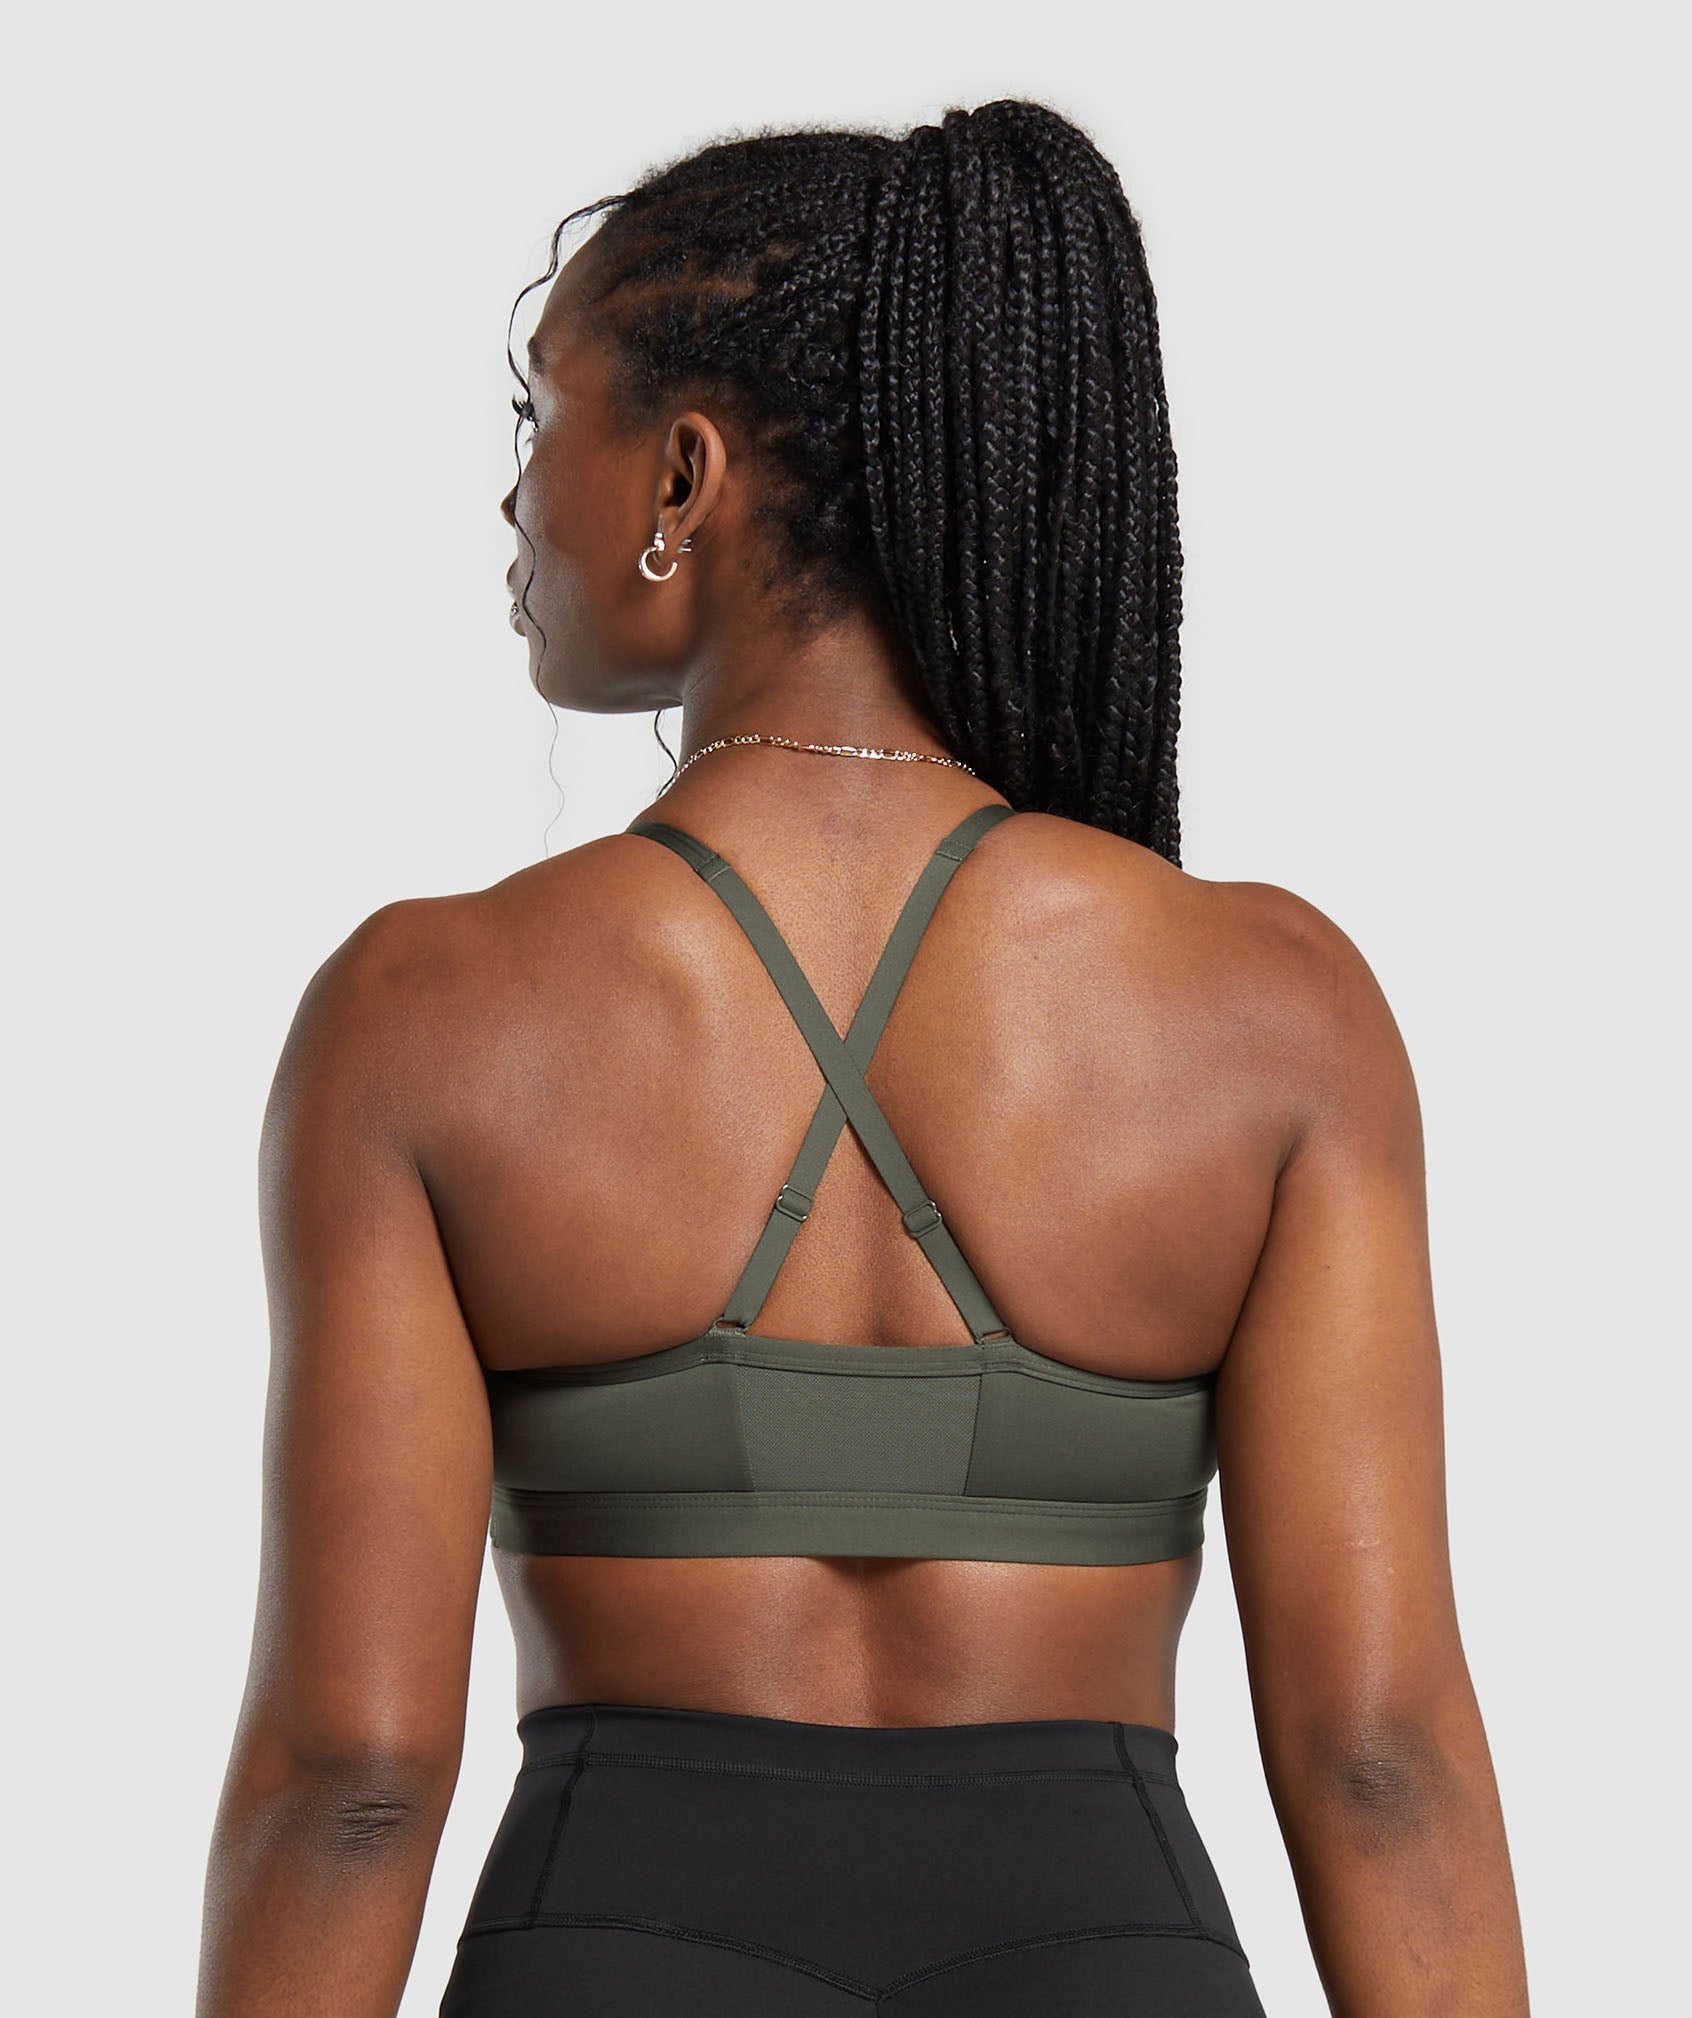 Ruched Sports Bra in Strength Green - view 2